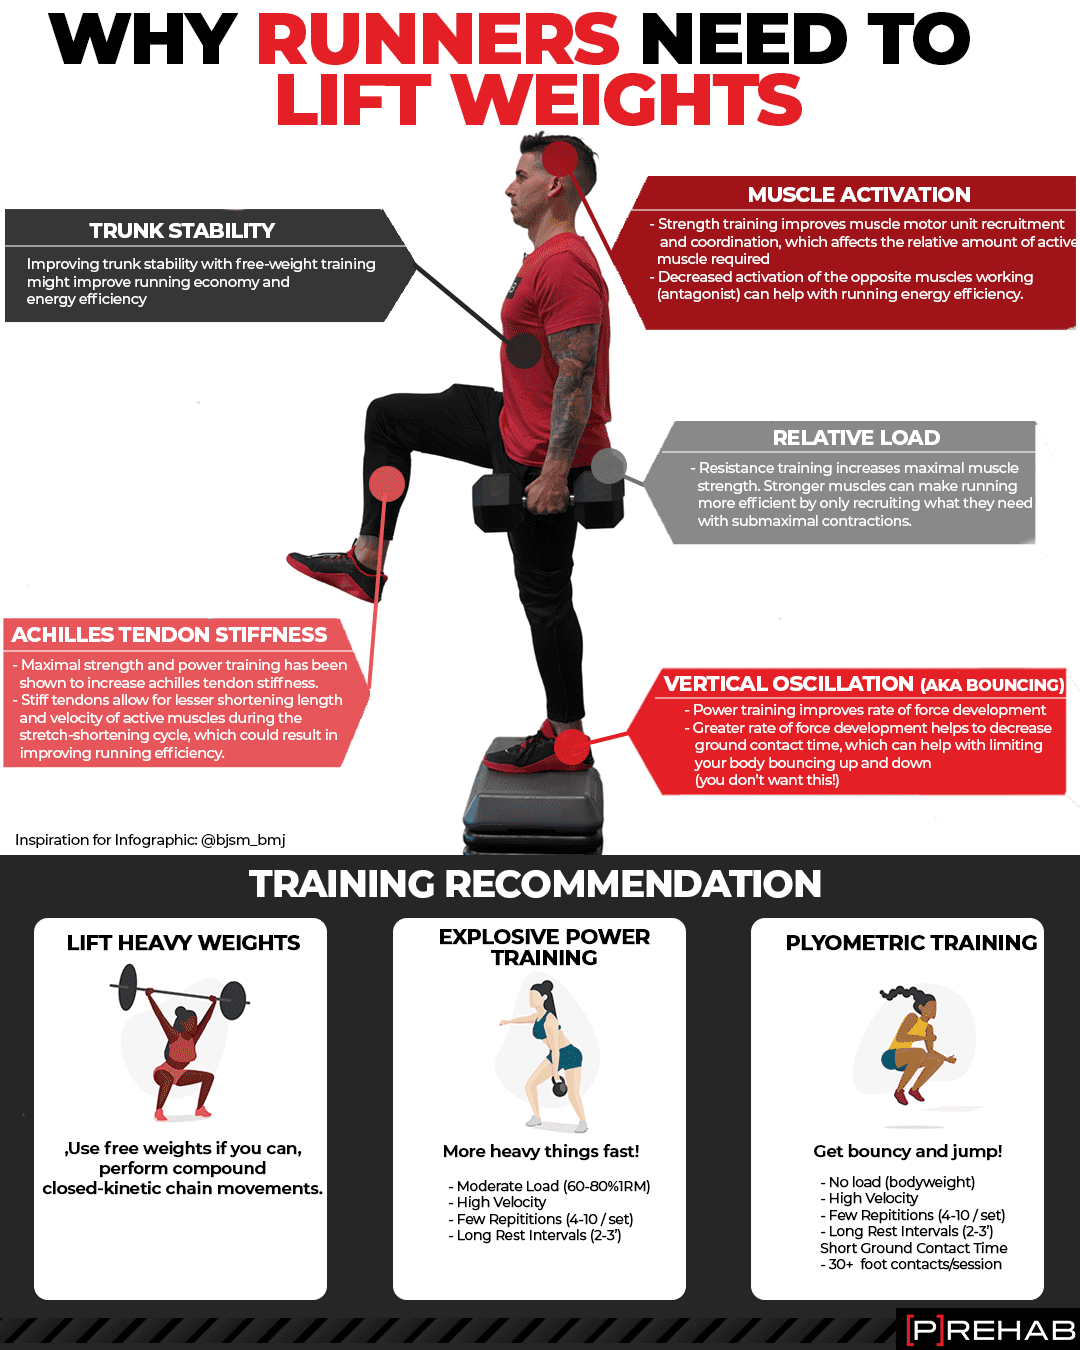 Training the Feet - SimpliFaster